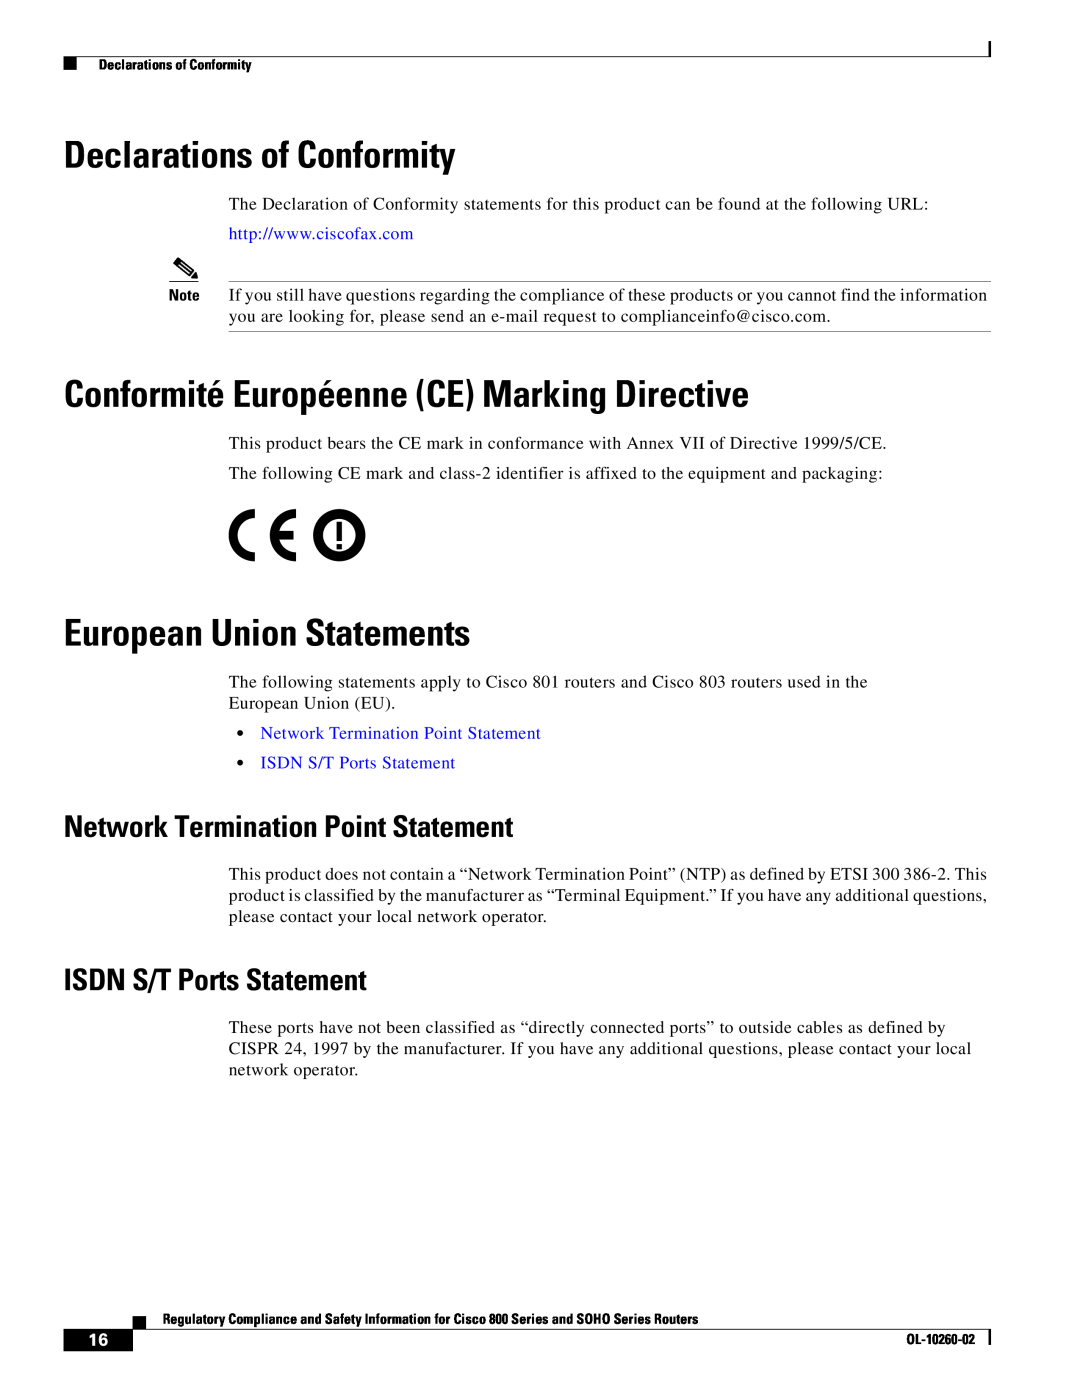 Cisco Systems SOHO Series Declarations of Conformity, Conformité Européenne CE Marking Directive, ISDN S/T Ports Statement 